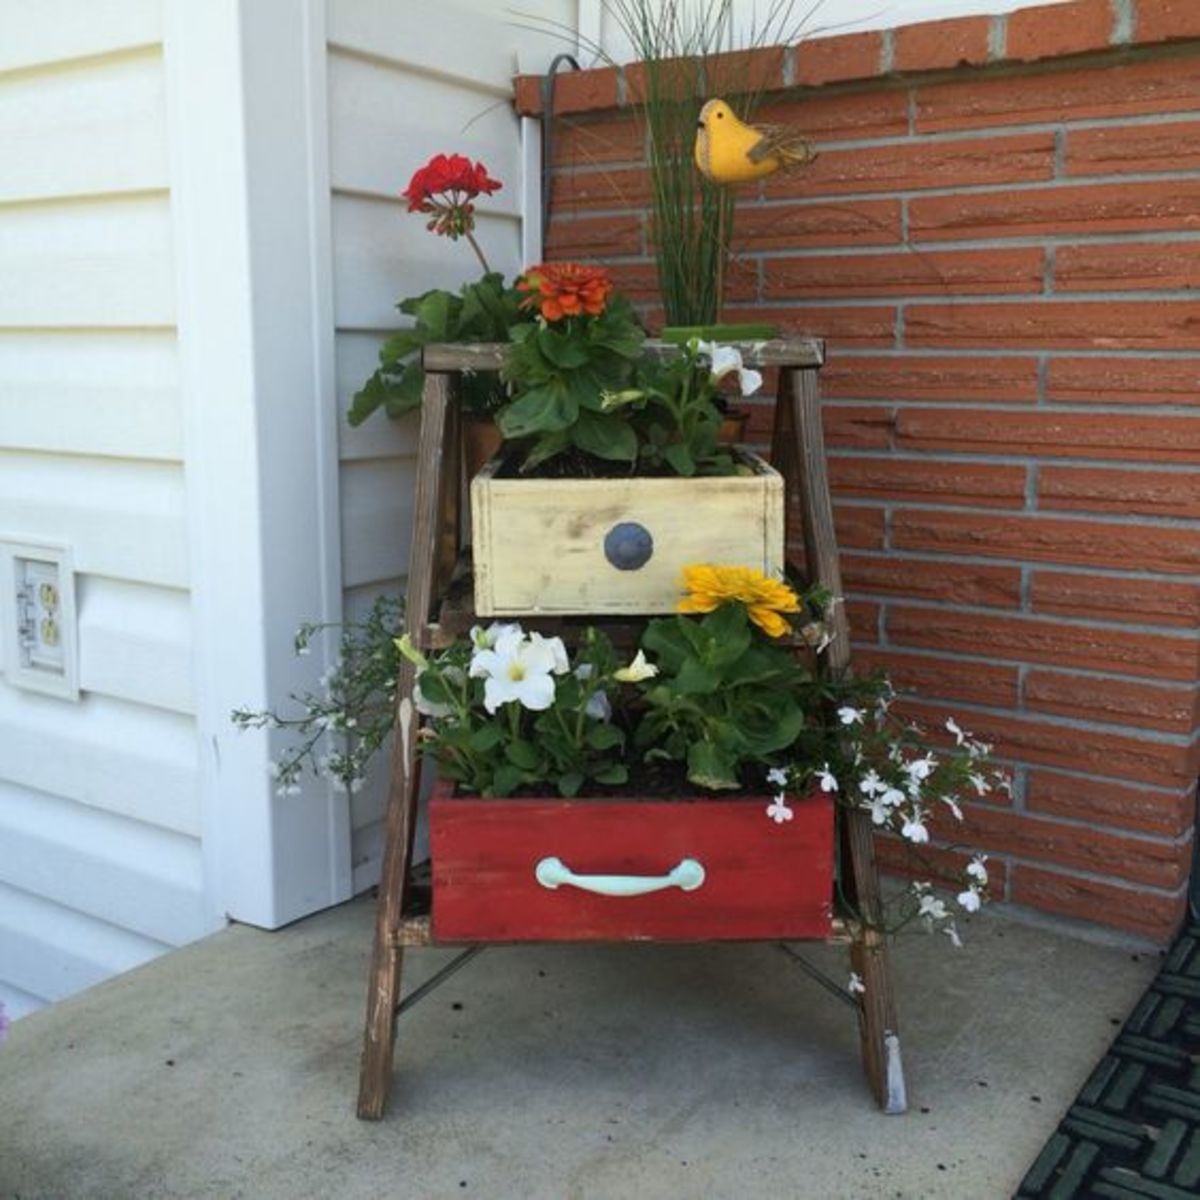 Old ladder and dresser drawers make great planters